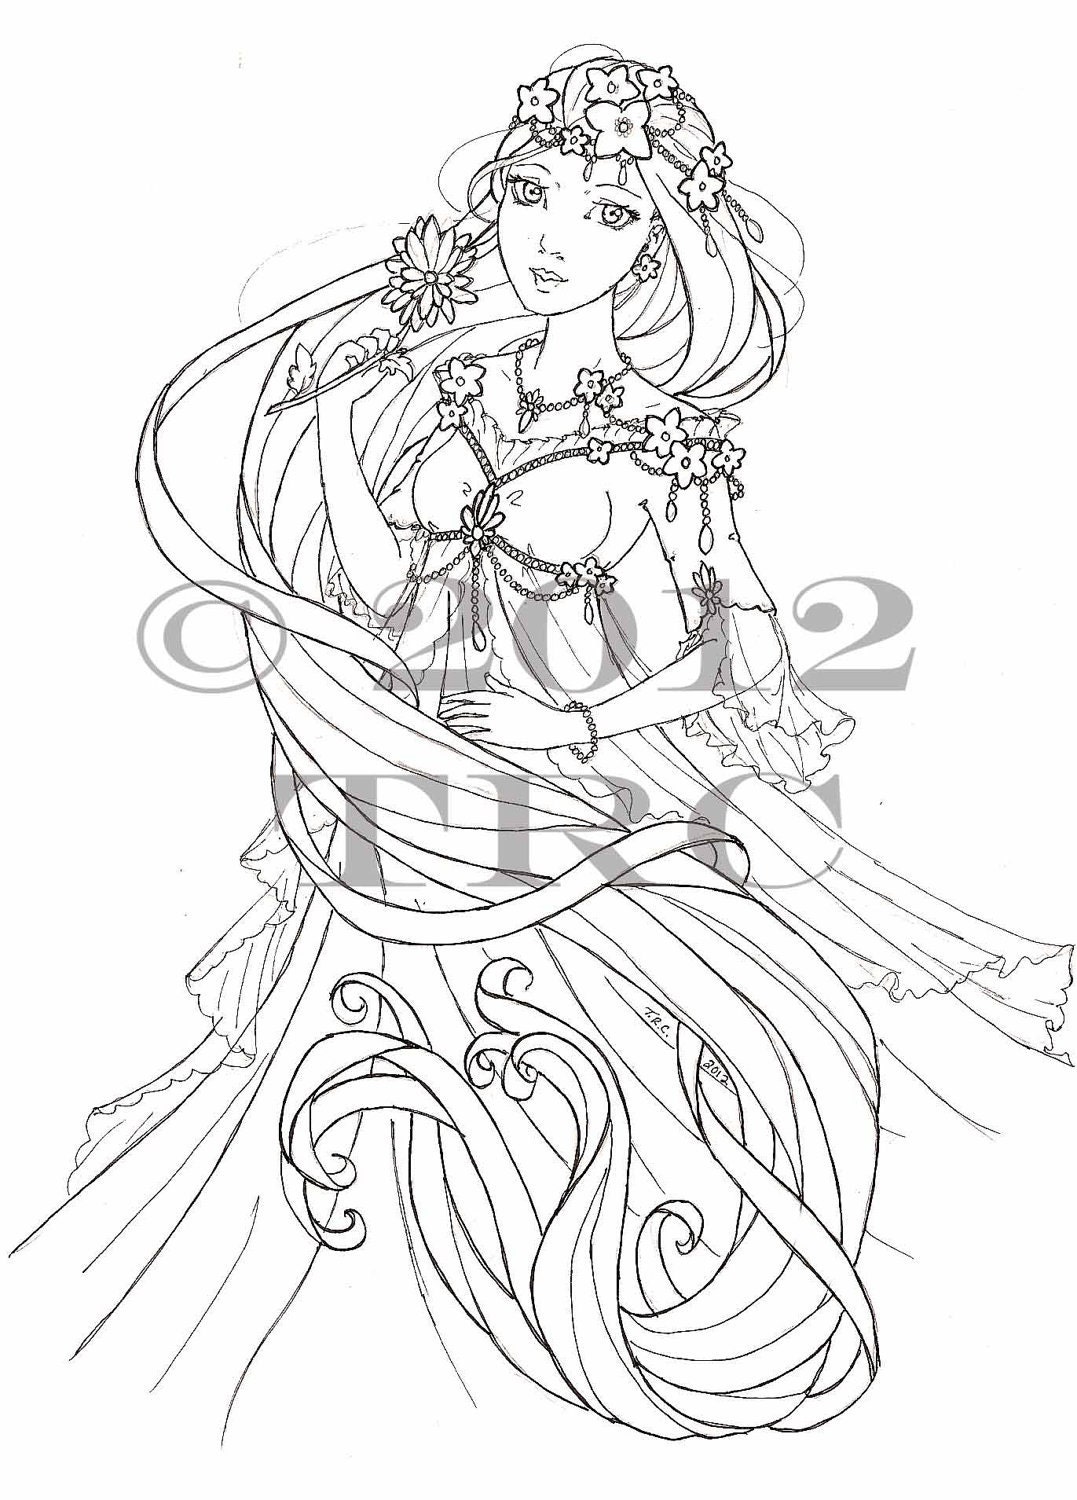 Anime Princess Coloring Pages Printable Sketch Coloring Page